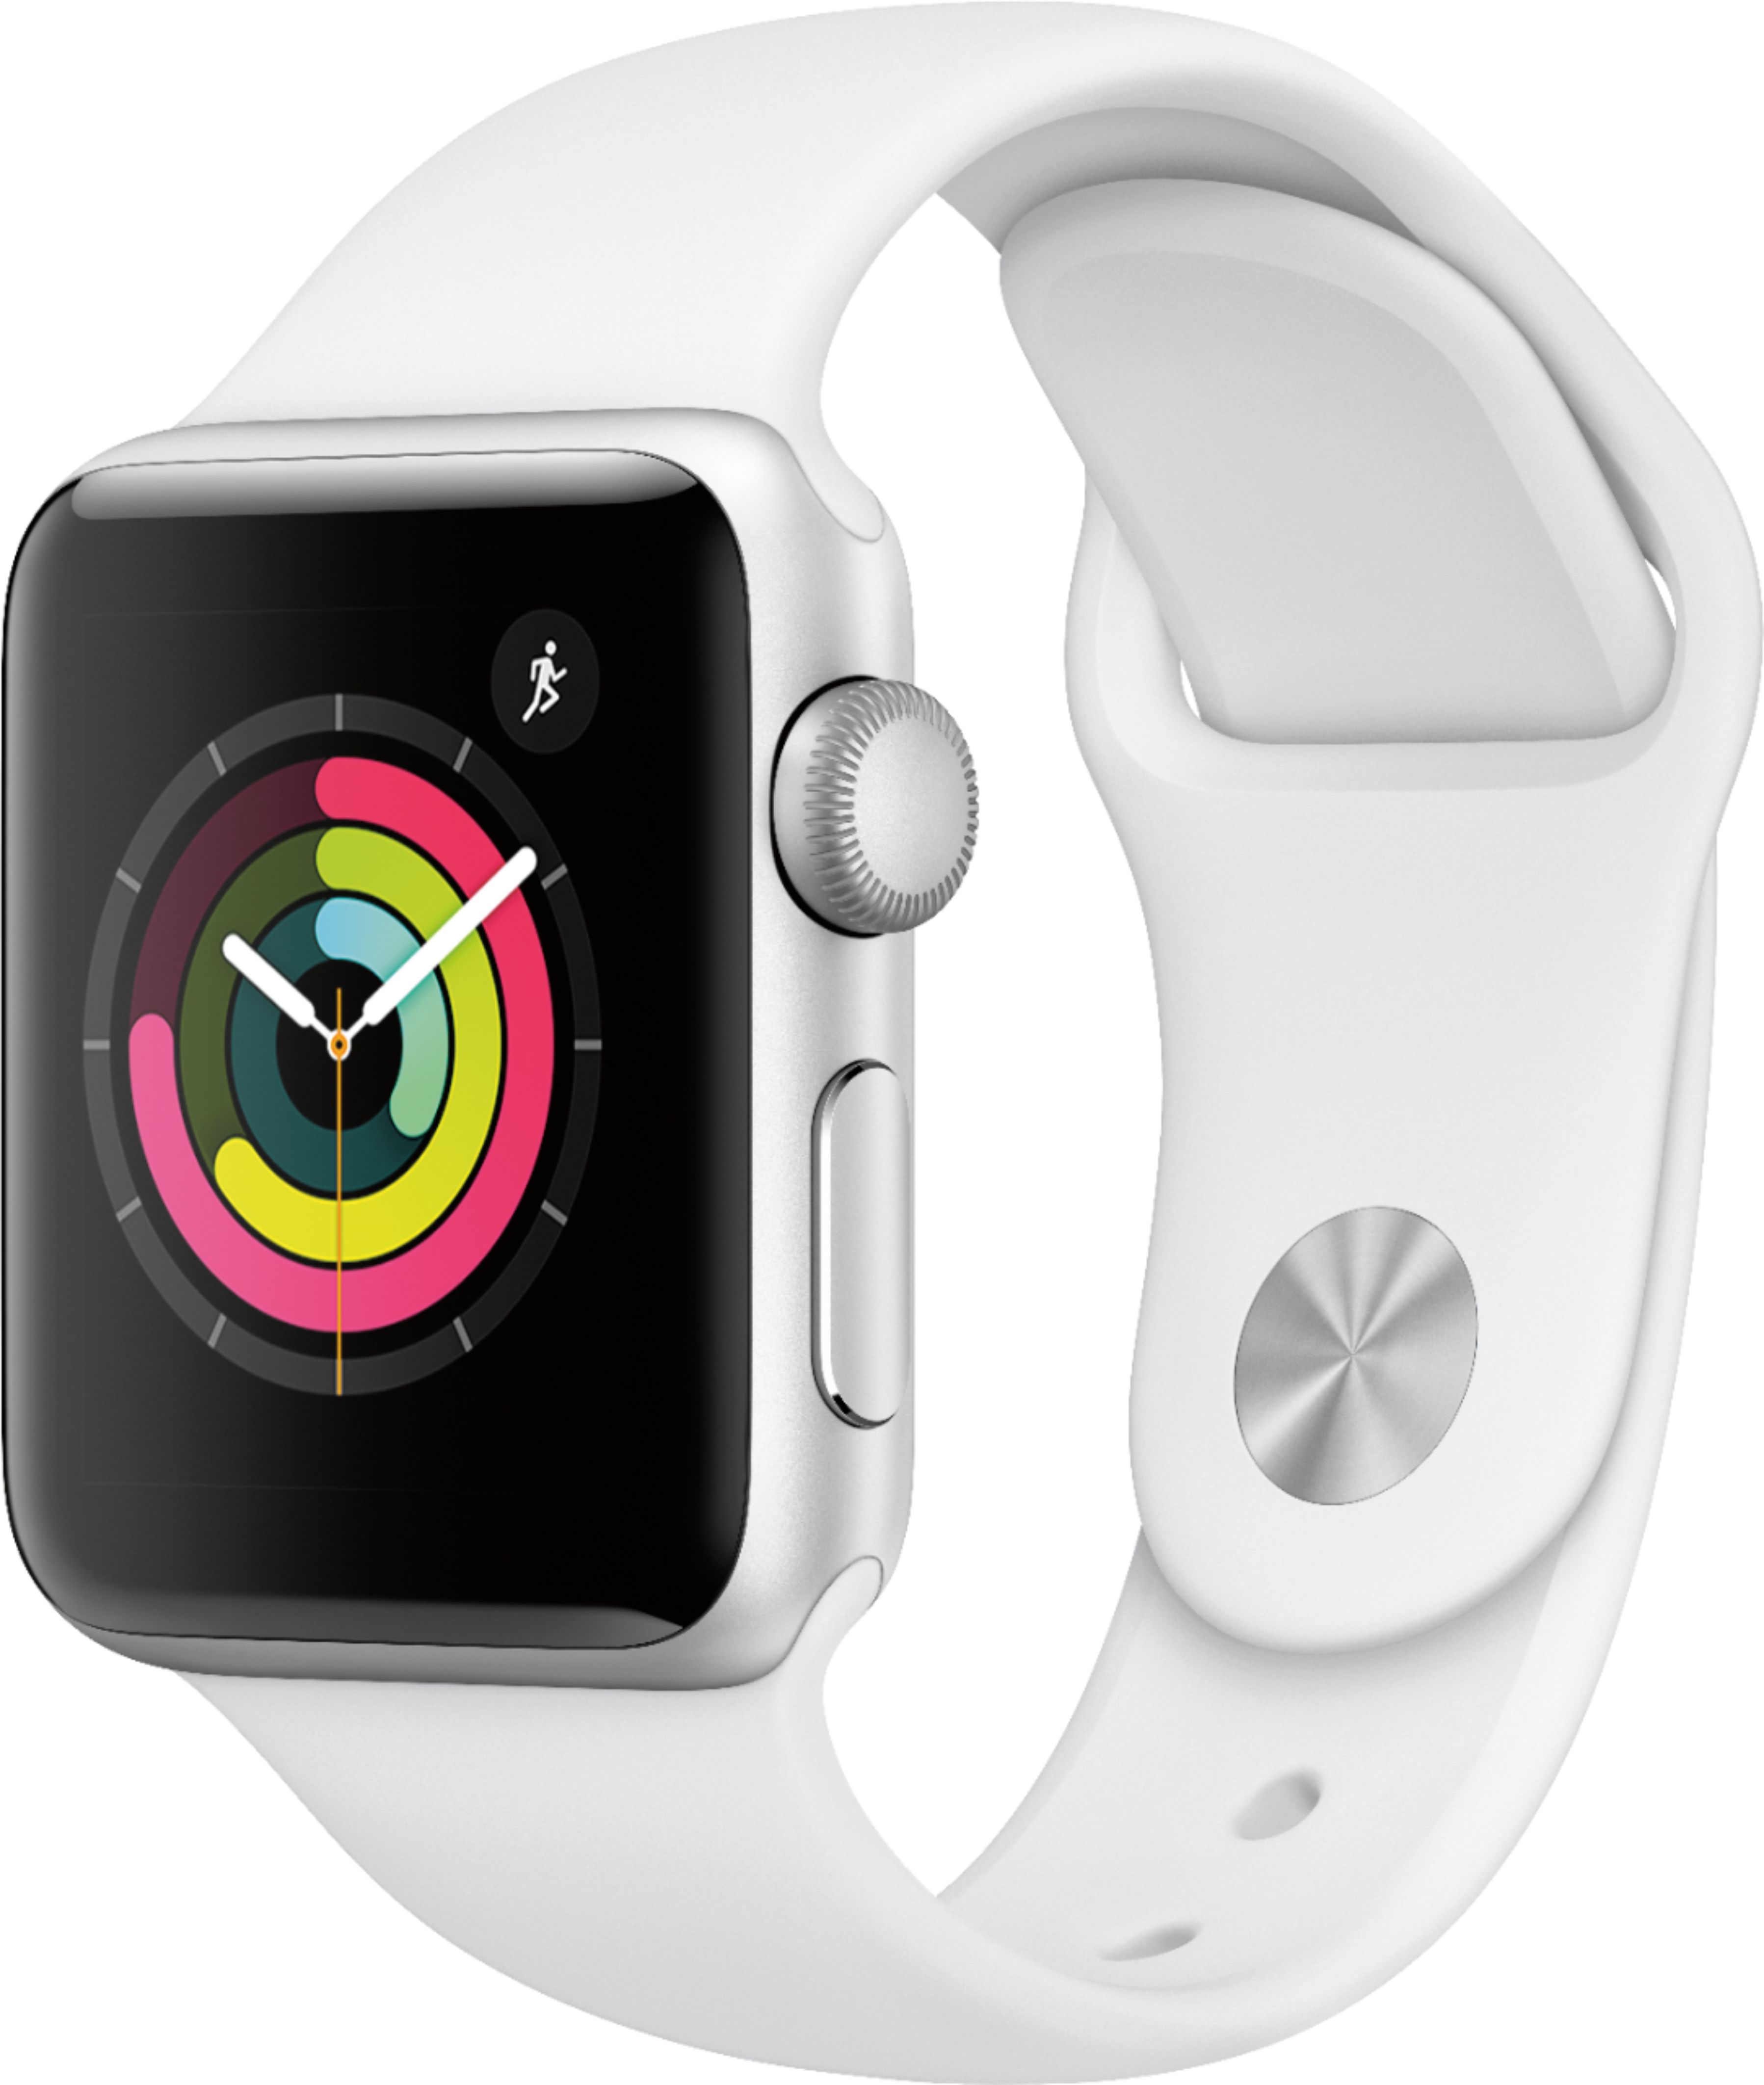 0190198805843 - APPLE WATCH SERIES 3 (GPS, 38MM) - SILVER ALUMINUM CASE WITH WHITE SPORT BAND